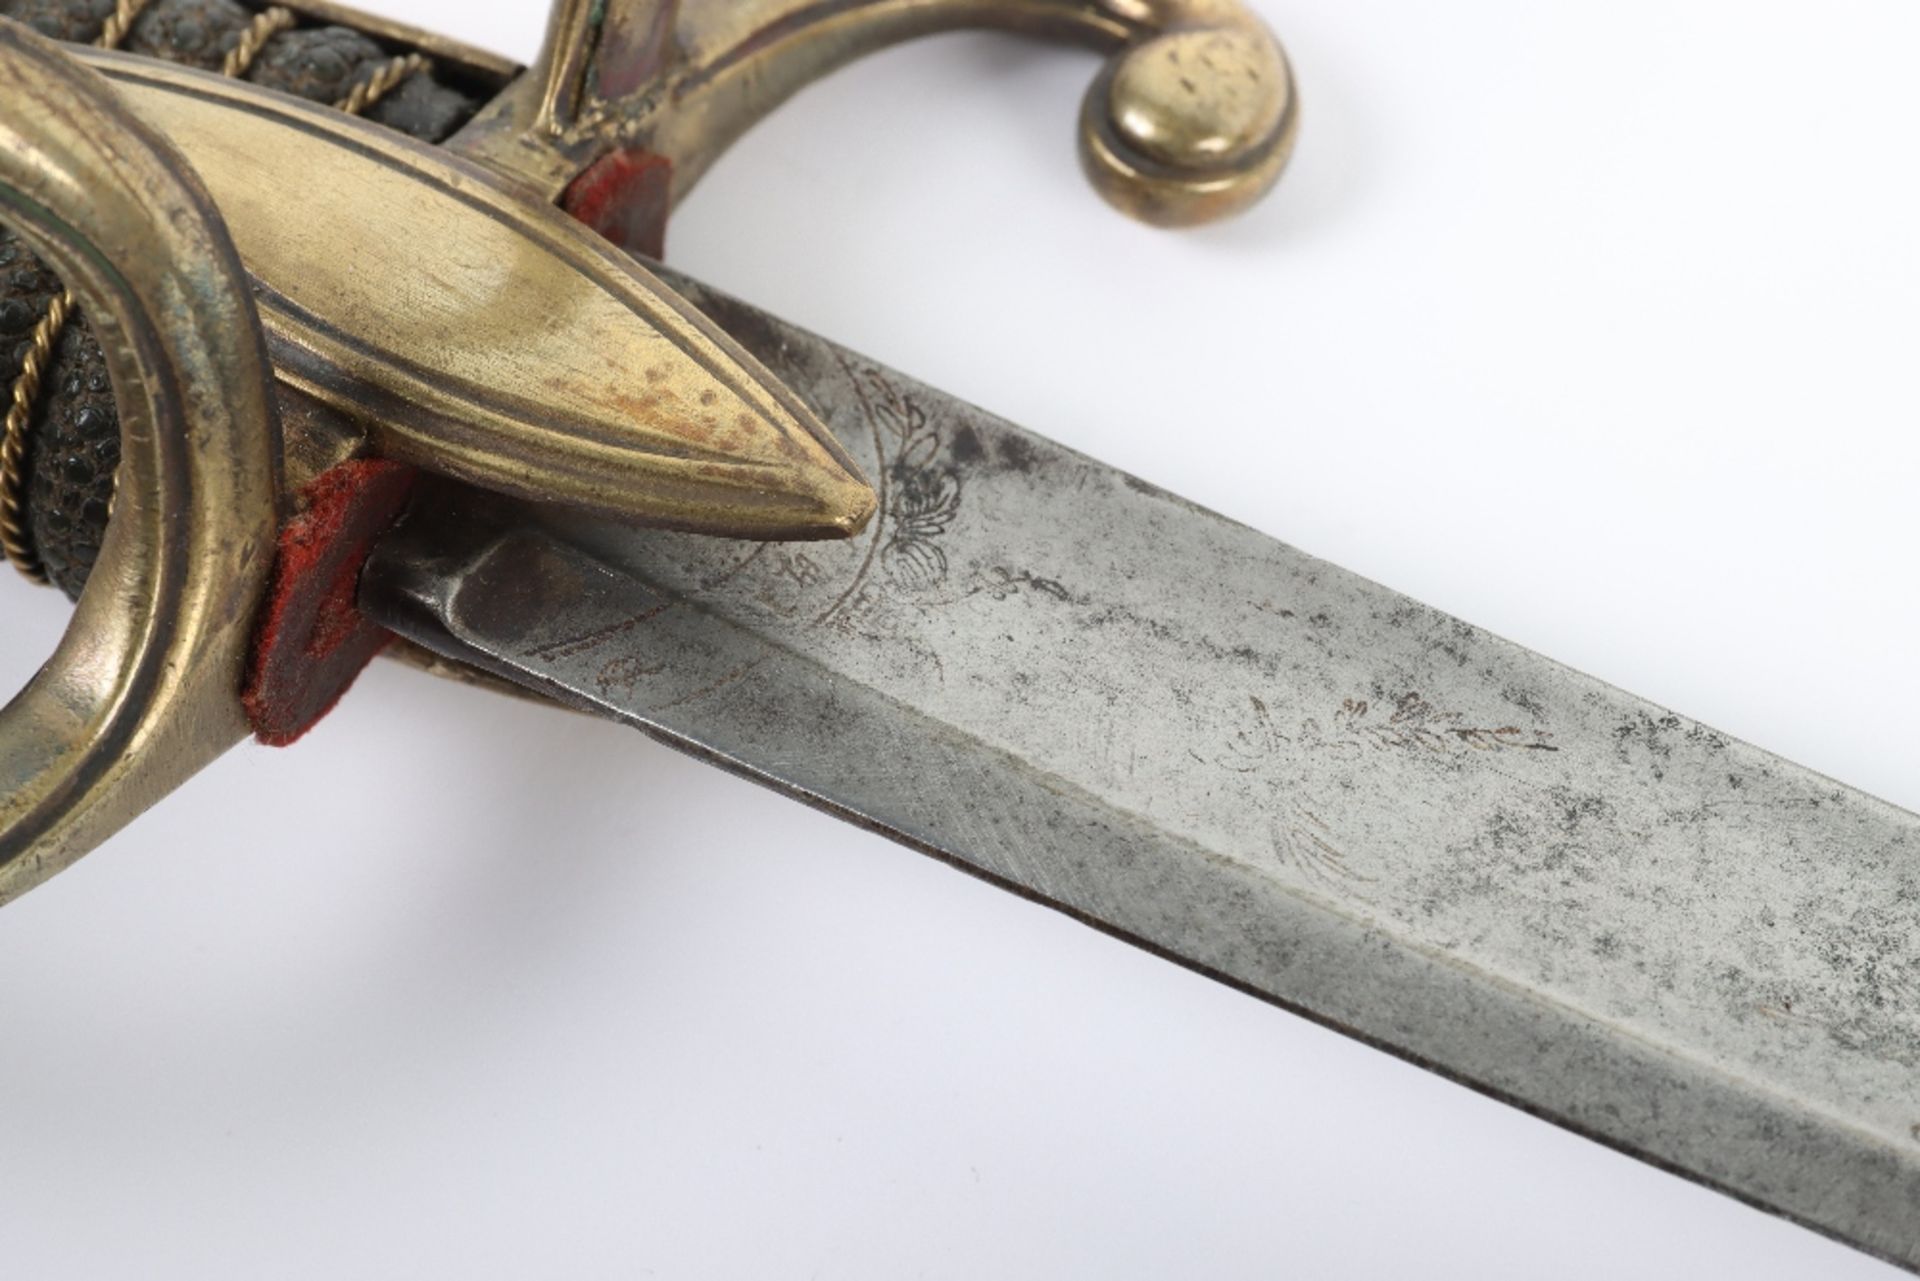 French Light Infantry Company Officers Sword - Image 8 of 10